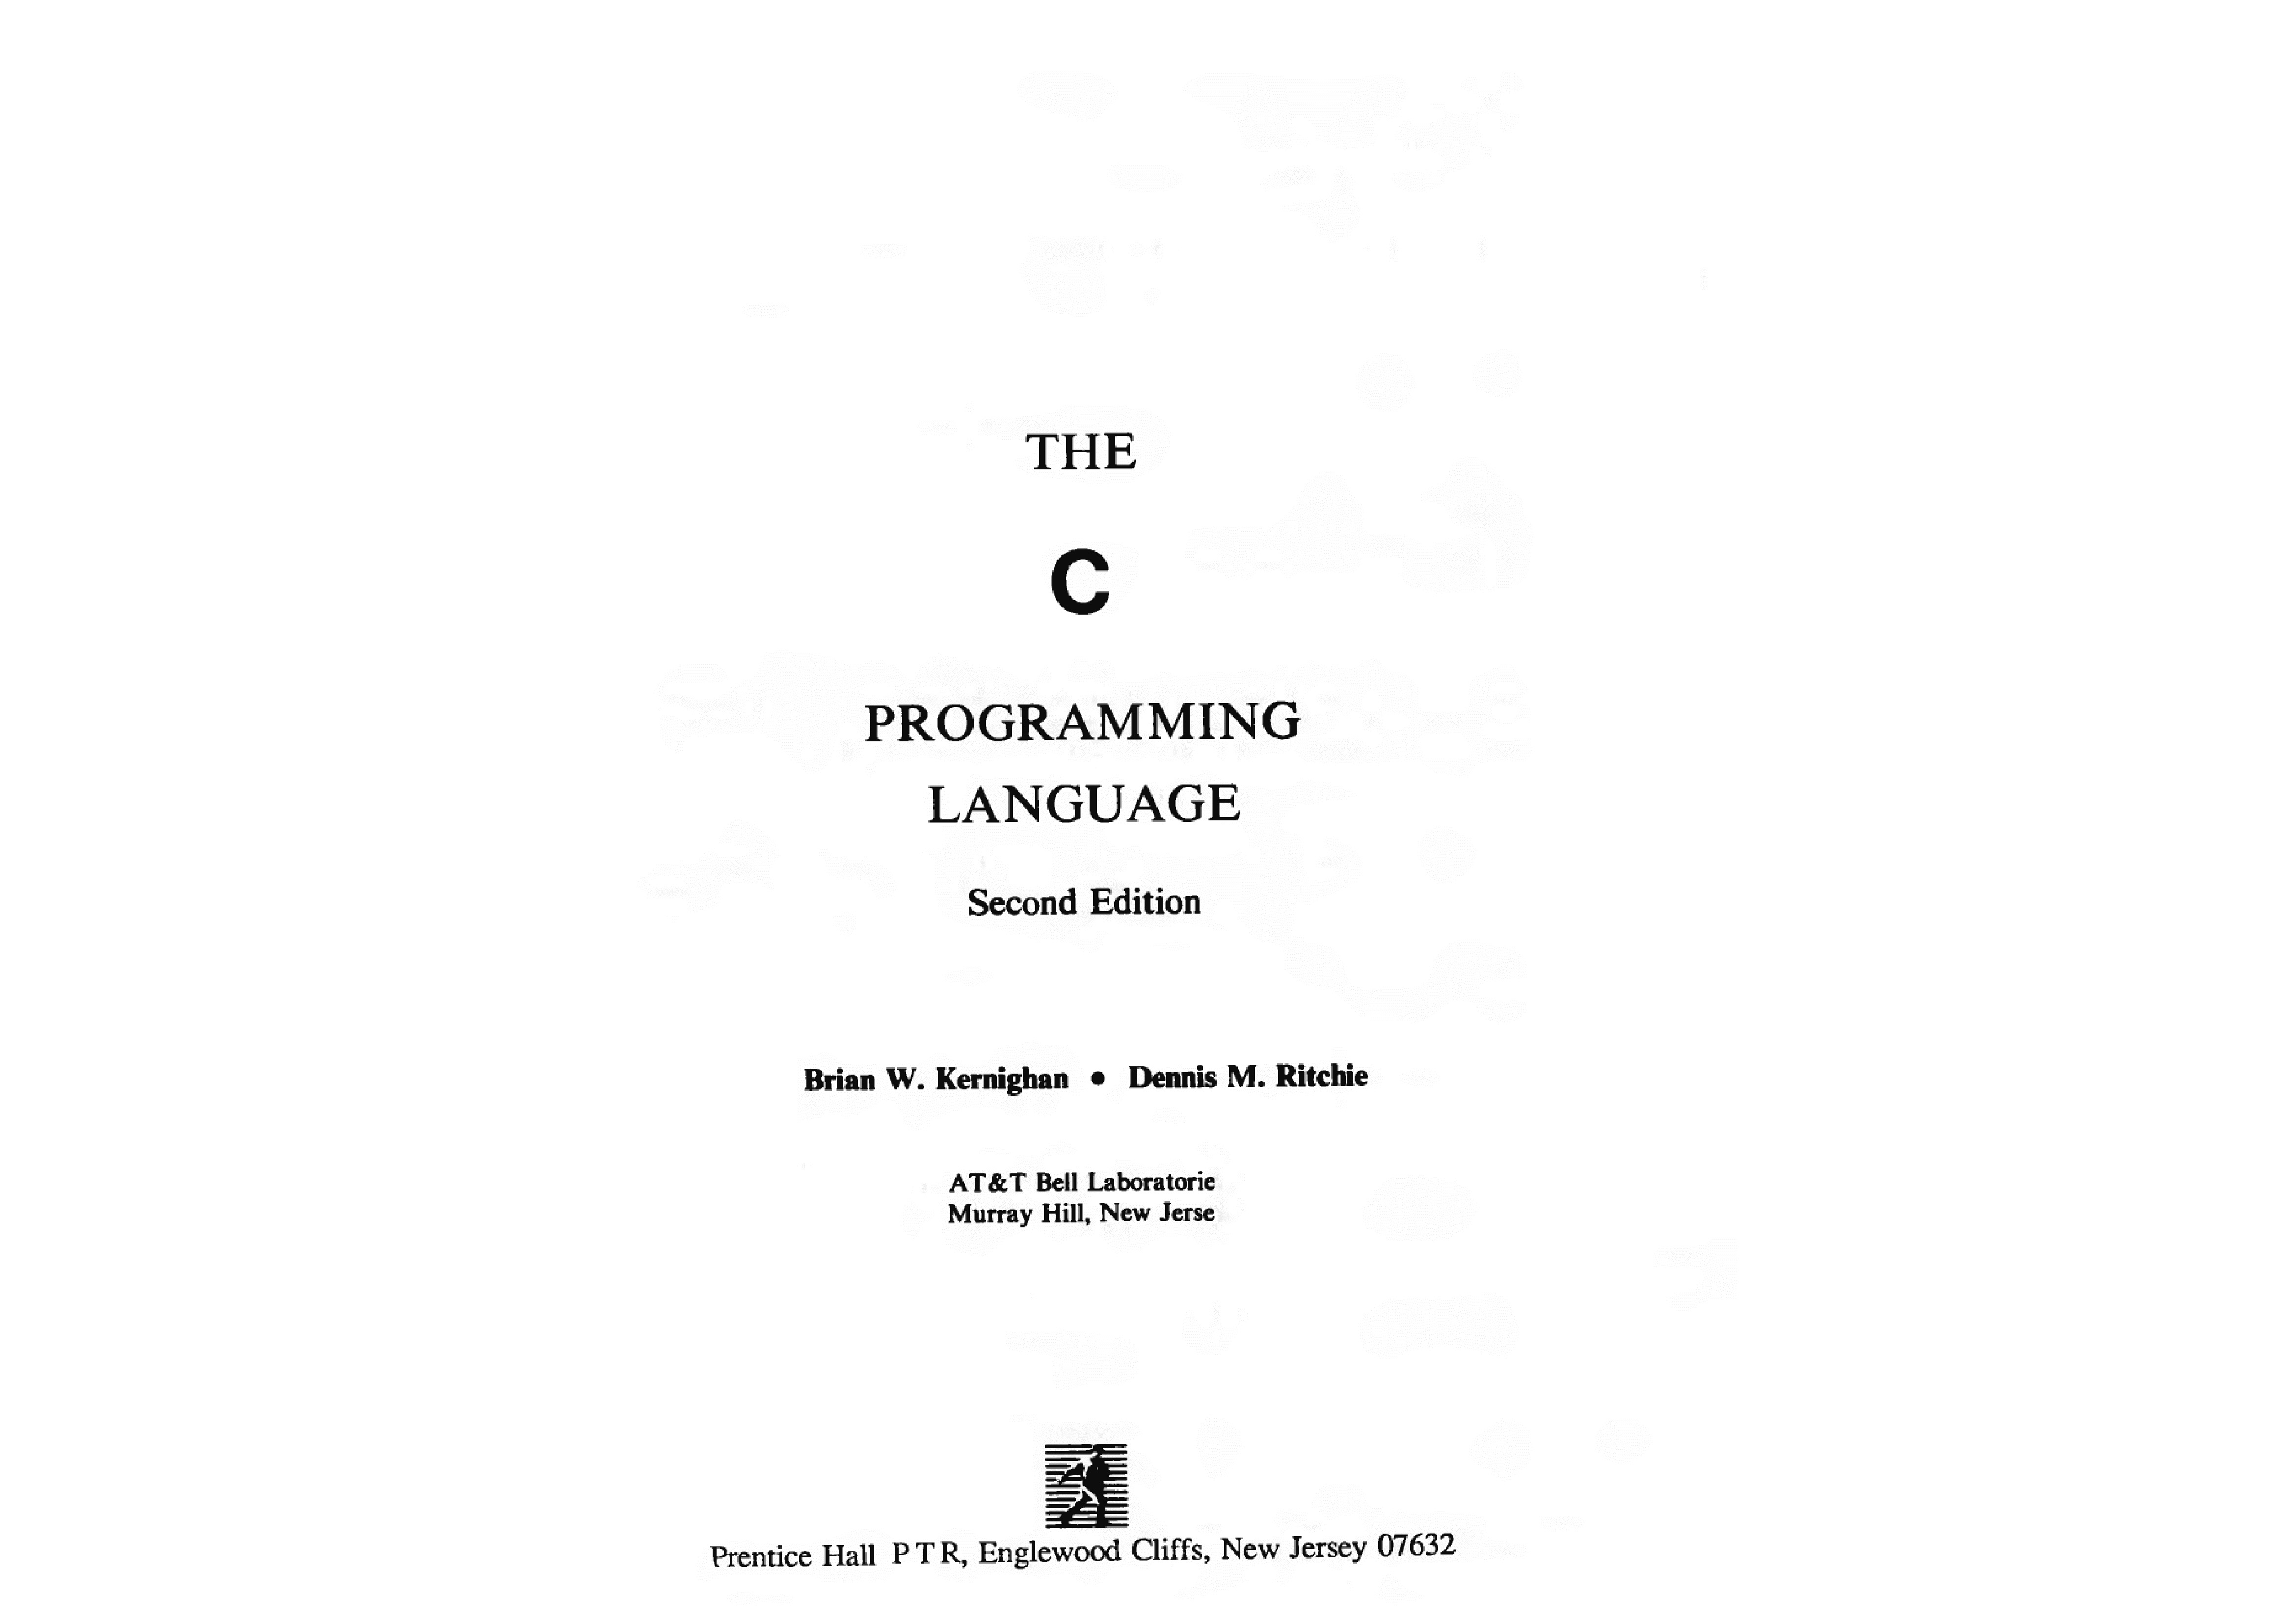 kernighan and ritchie the c programming language free download